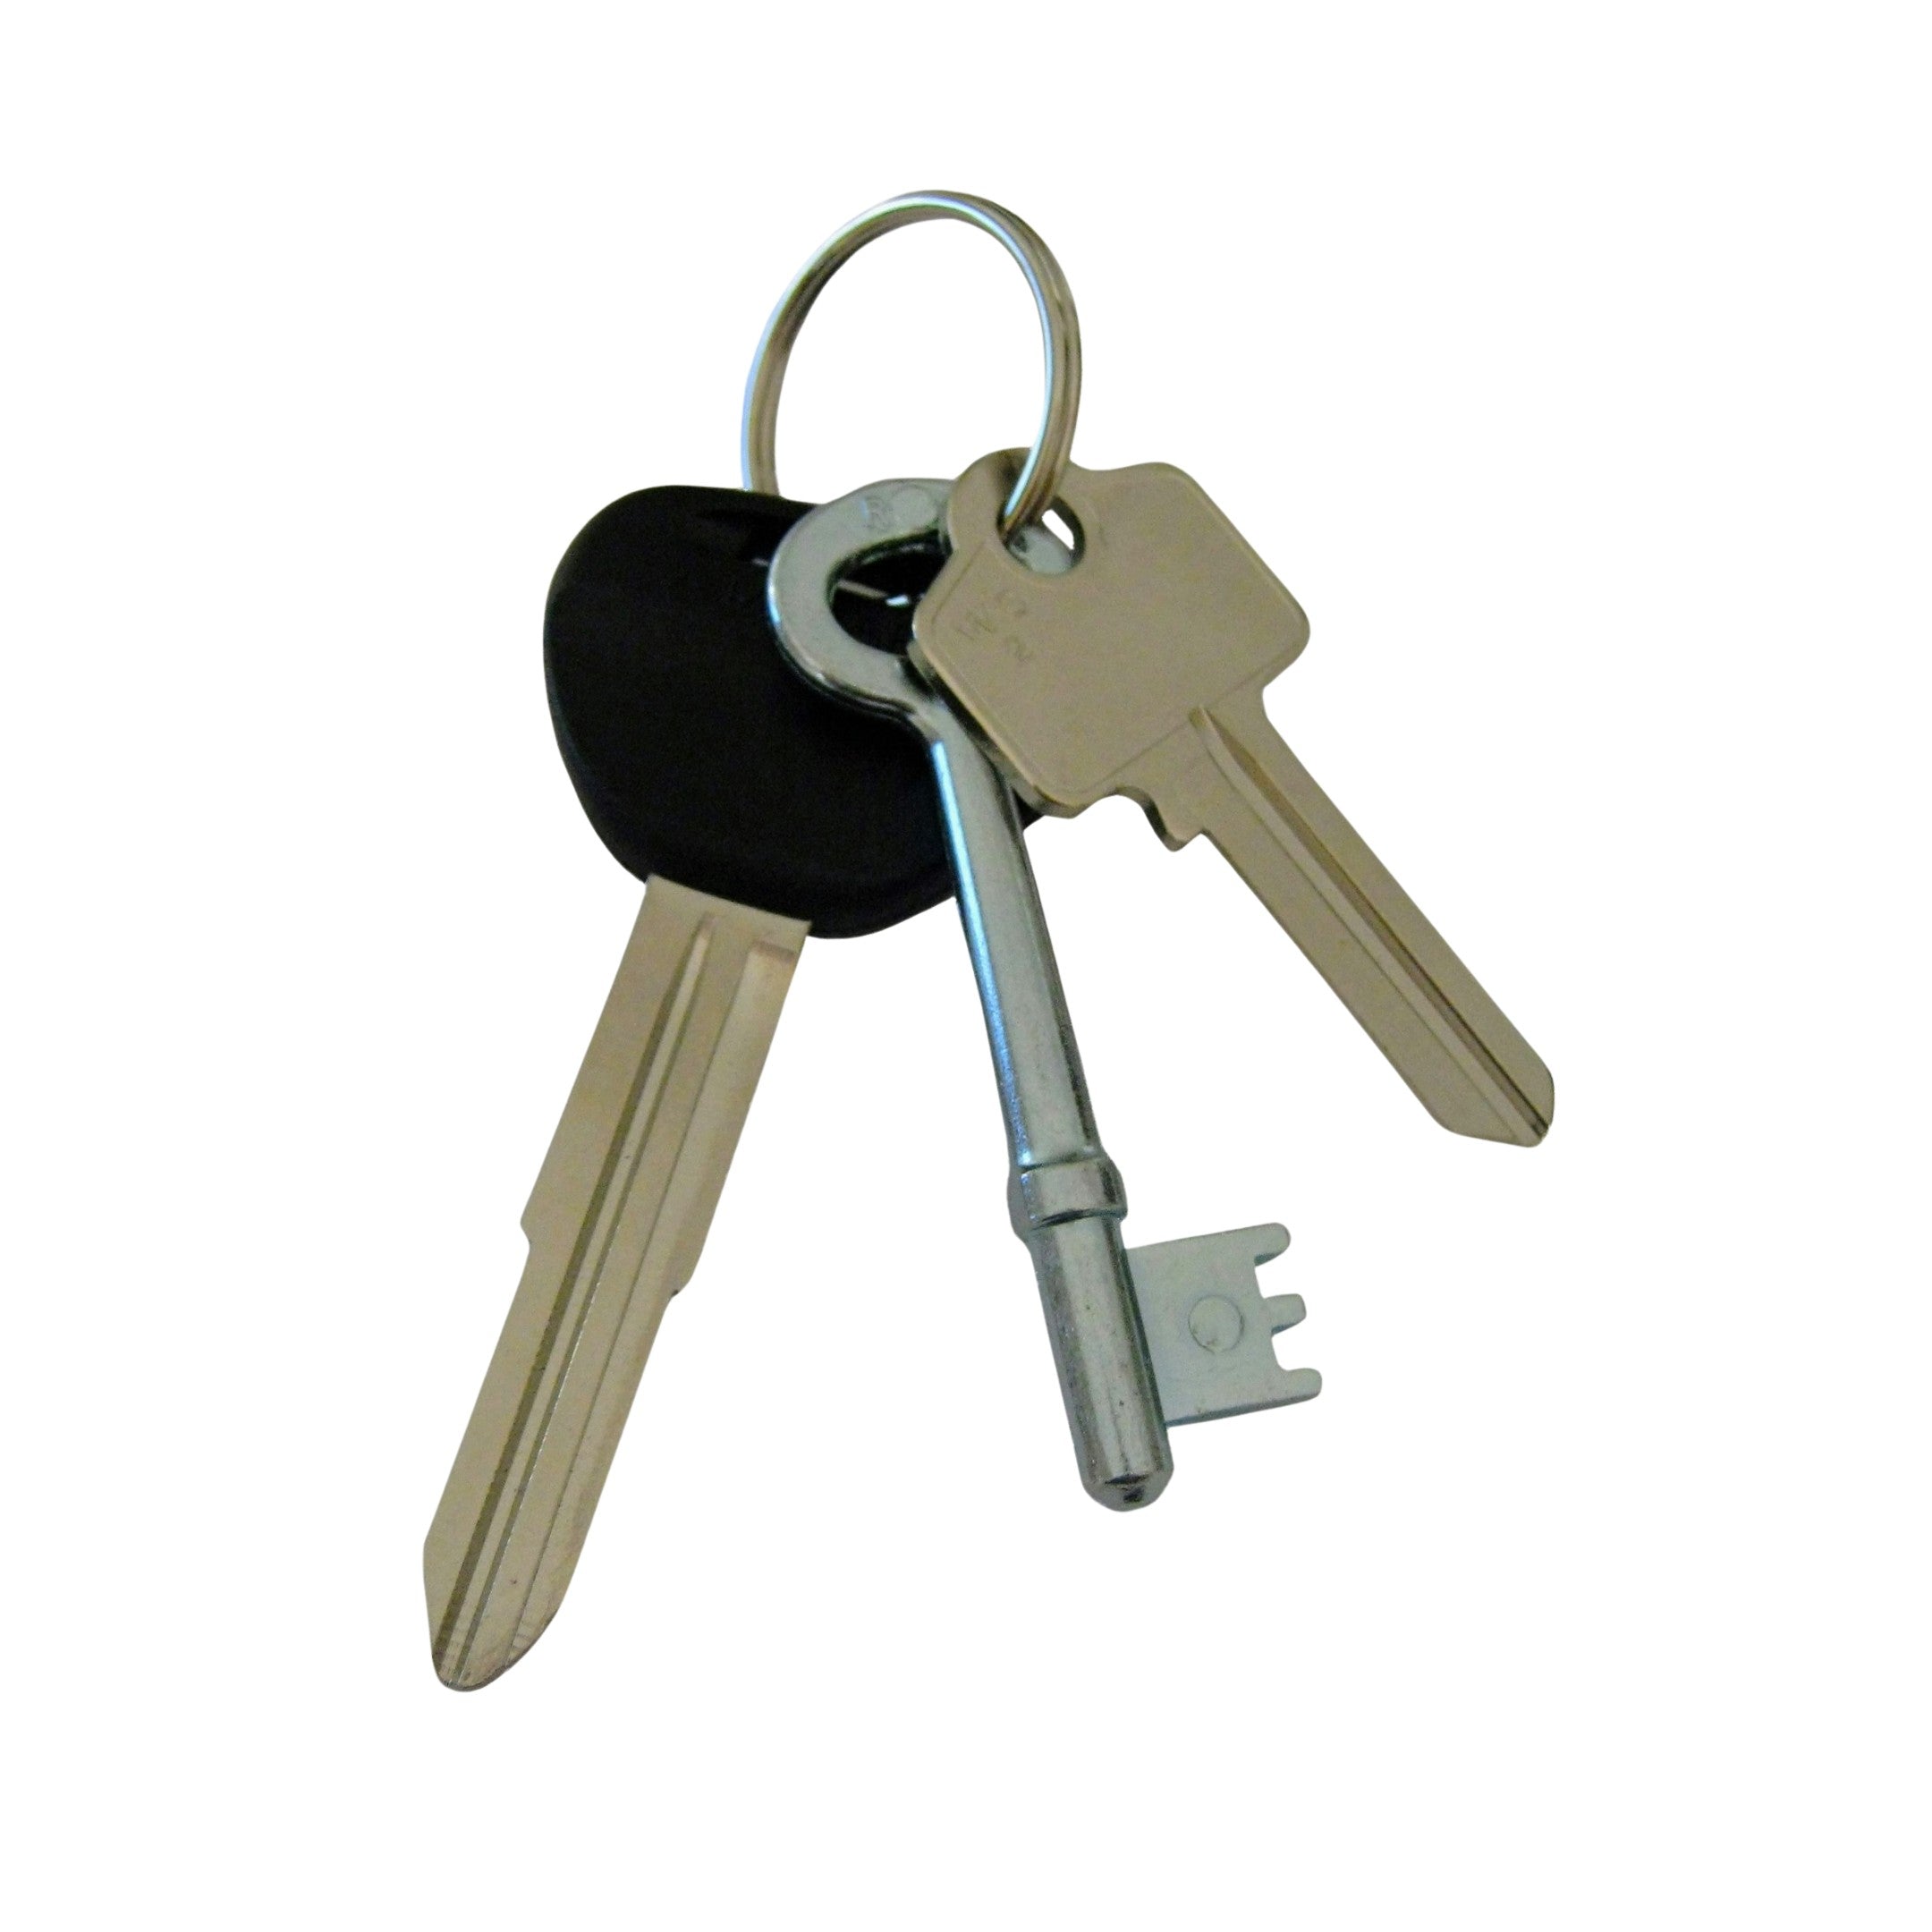 blank-car-key-mortice-key-house-key-ready-for-making-copies